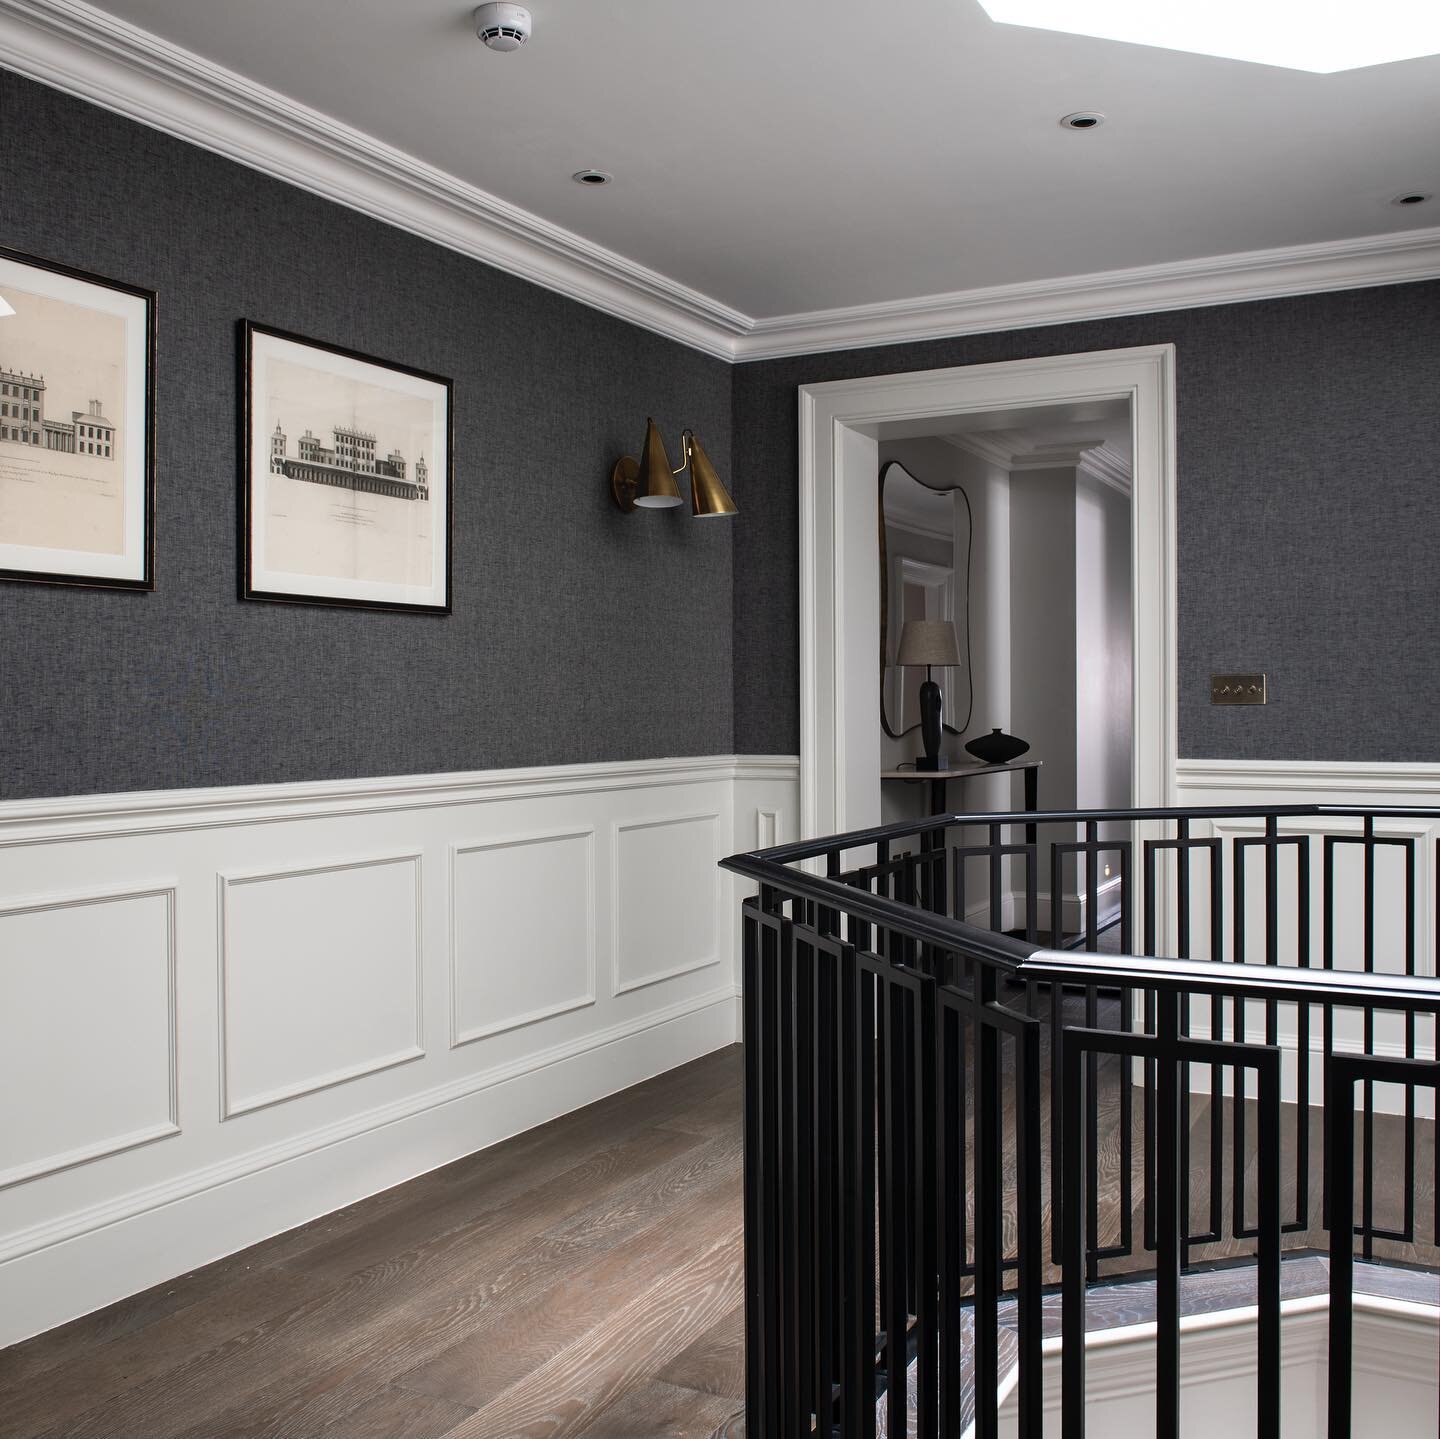 Dark textured walls you want to touch, contrasted with traditional painted panelling to create a tailored look for this London townhouse landing &amp; home office.  Interiors @schillerbeynoninteriors Photograpy @jodystewartphotography Architecture @s